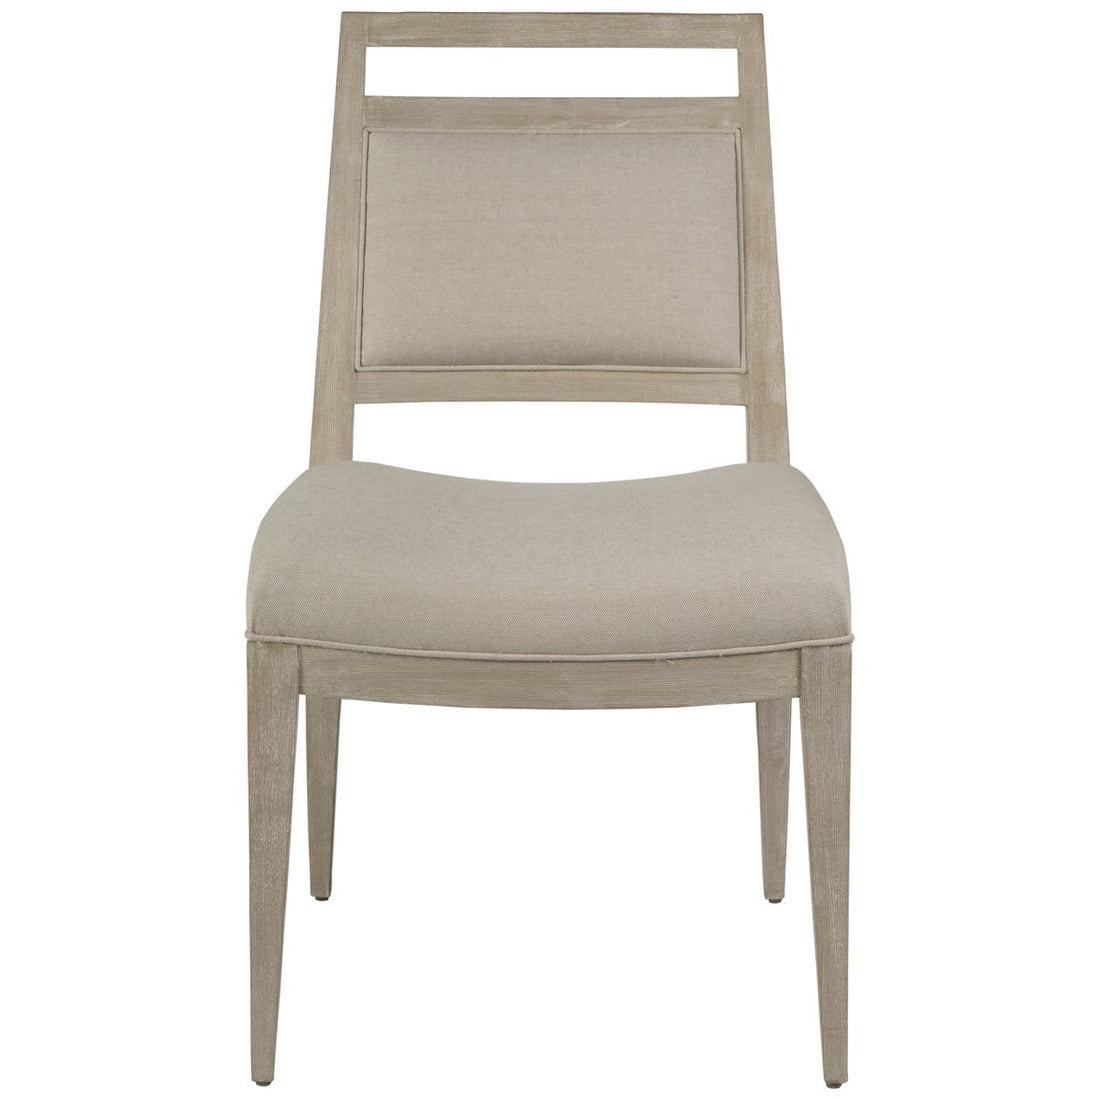 Artistica Home Nico Upholstered Side Chair 2222-880